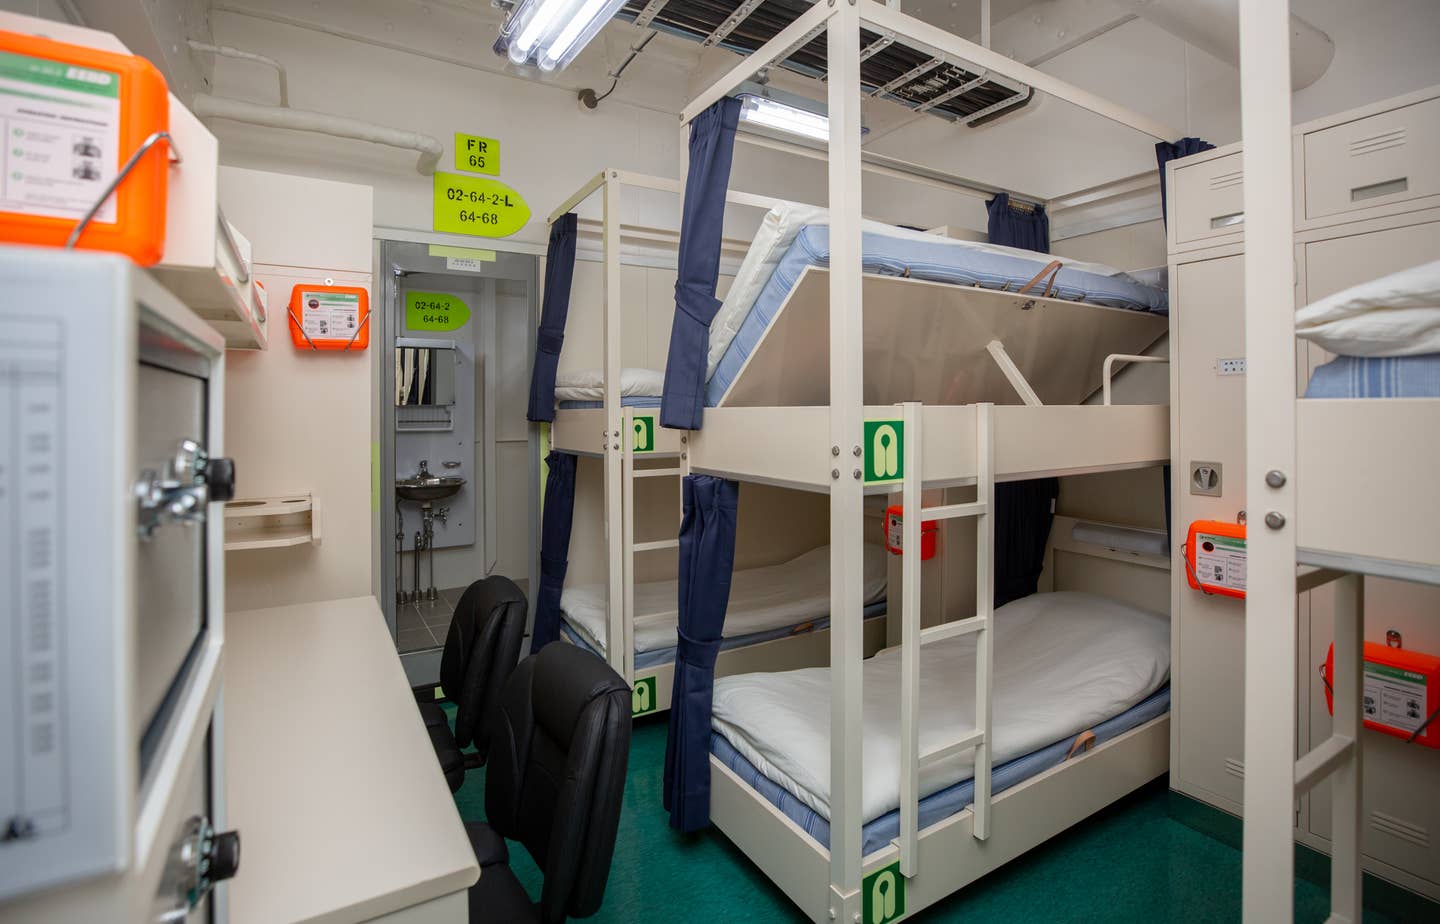 A view of some of the crew quarters below decks on the <em>Yushan. Office of the President of Taiwan</em>